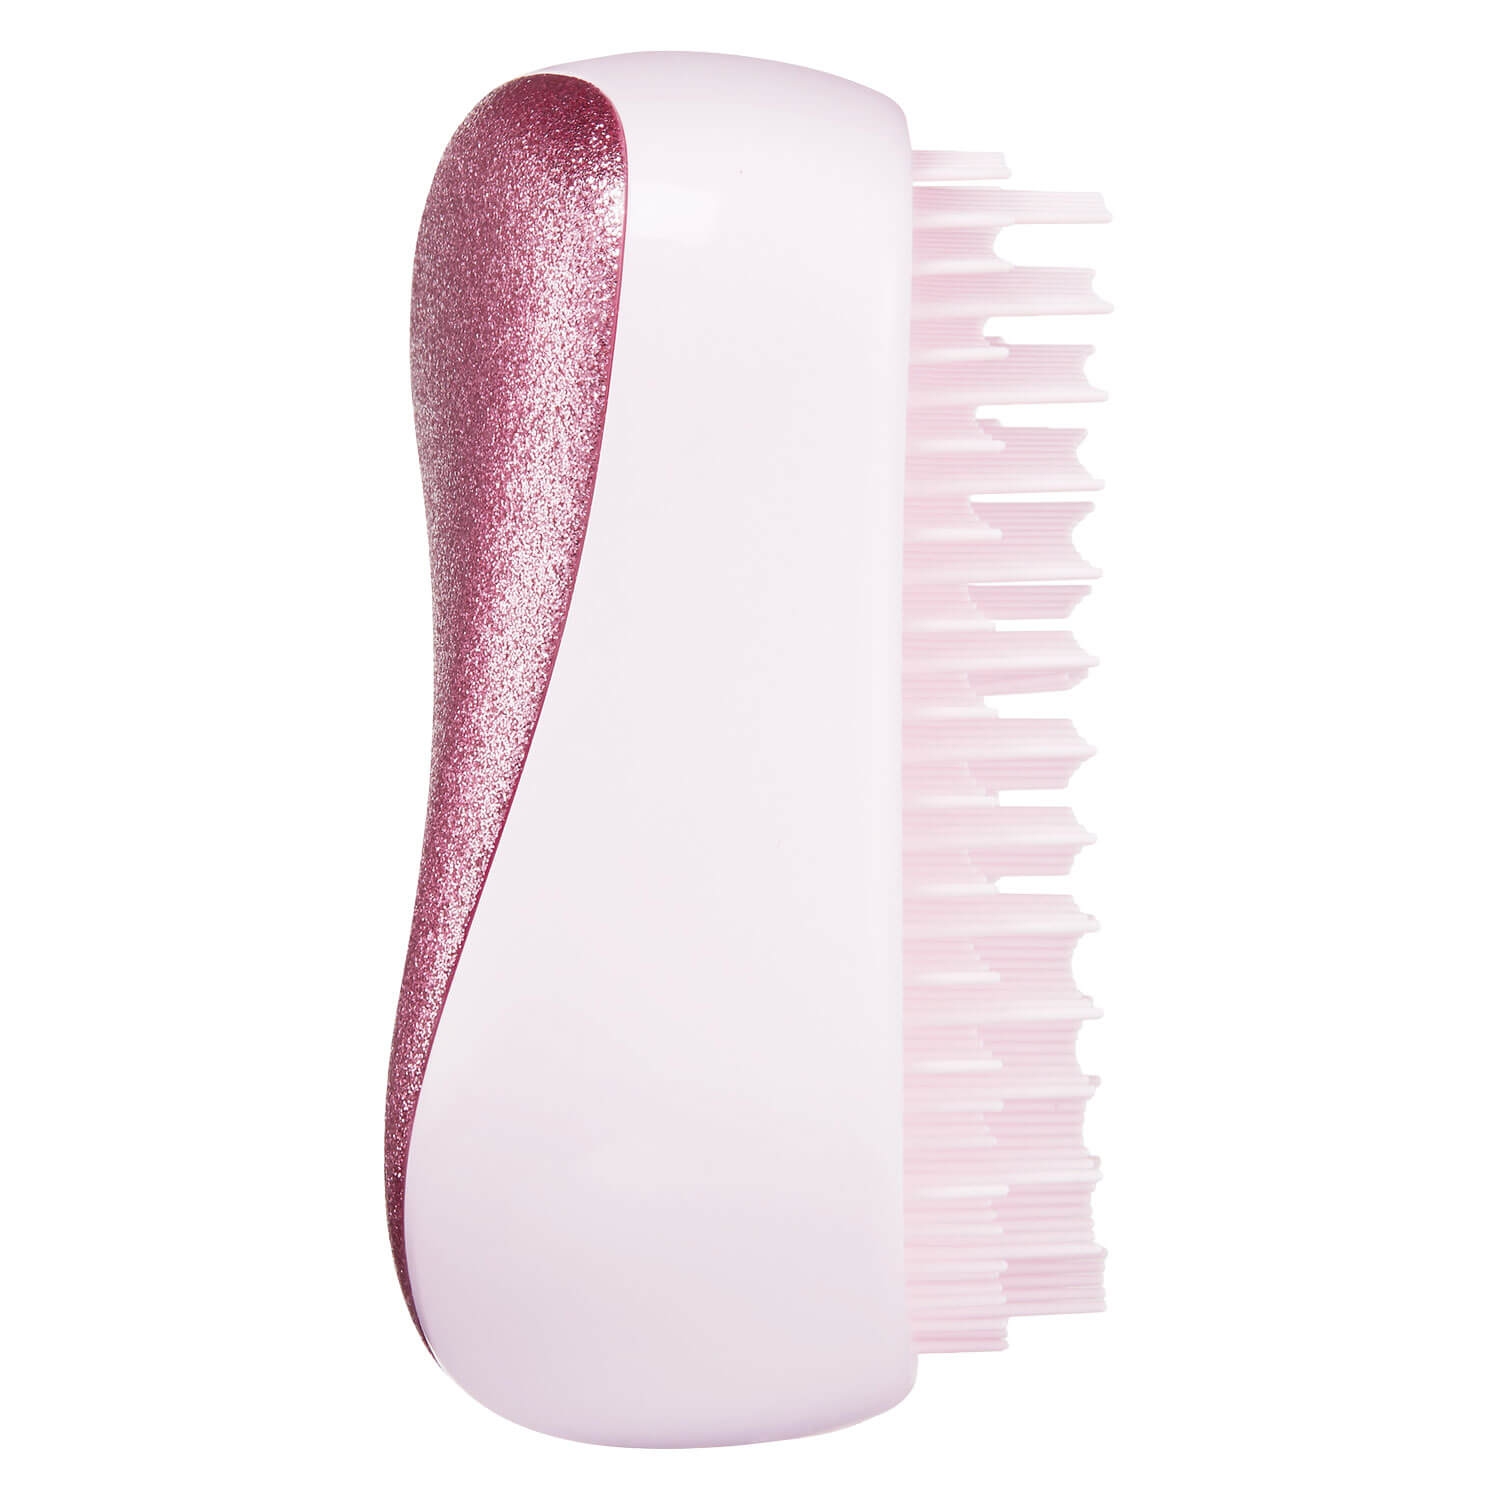 Product image from Tangle Teezer - Compact Styler Pink Glitter